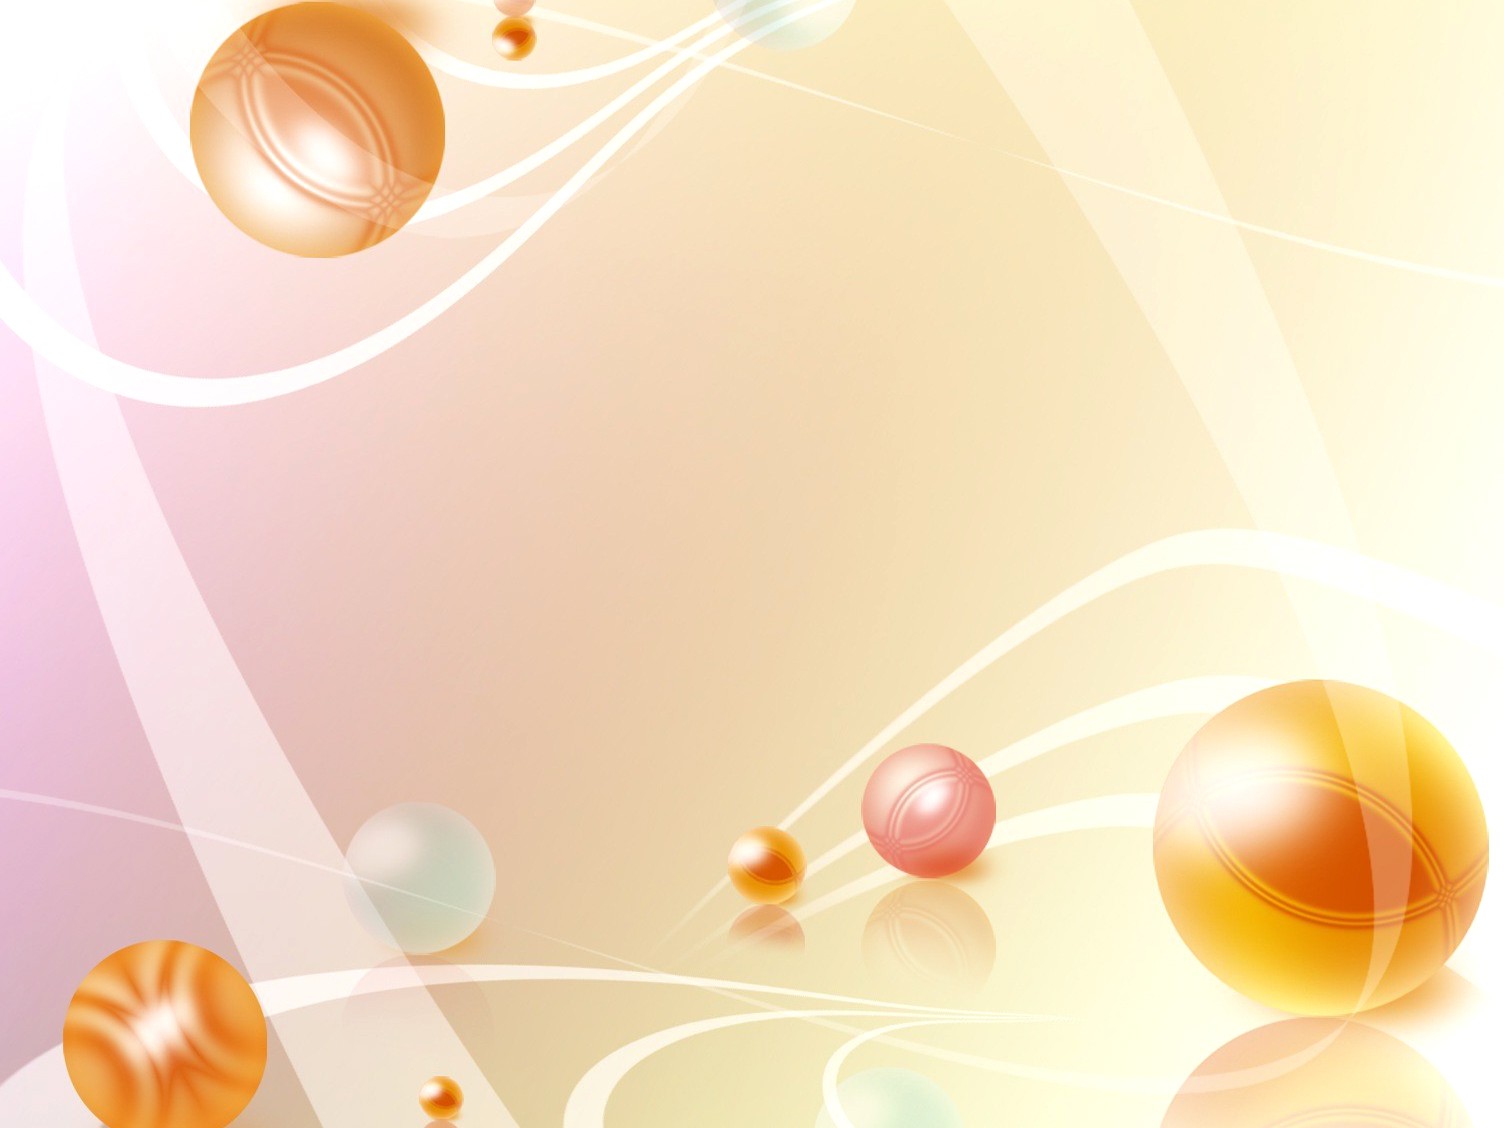 Bubble All Abstract Art Normal Background Image Colorful